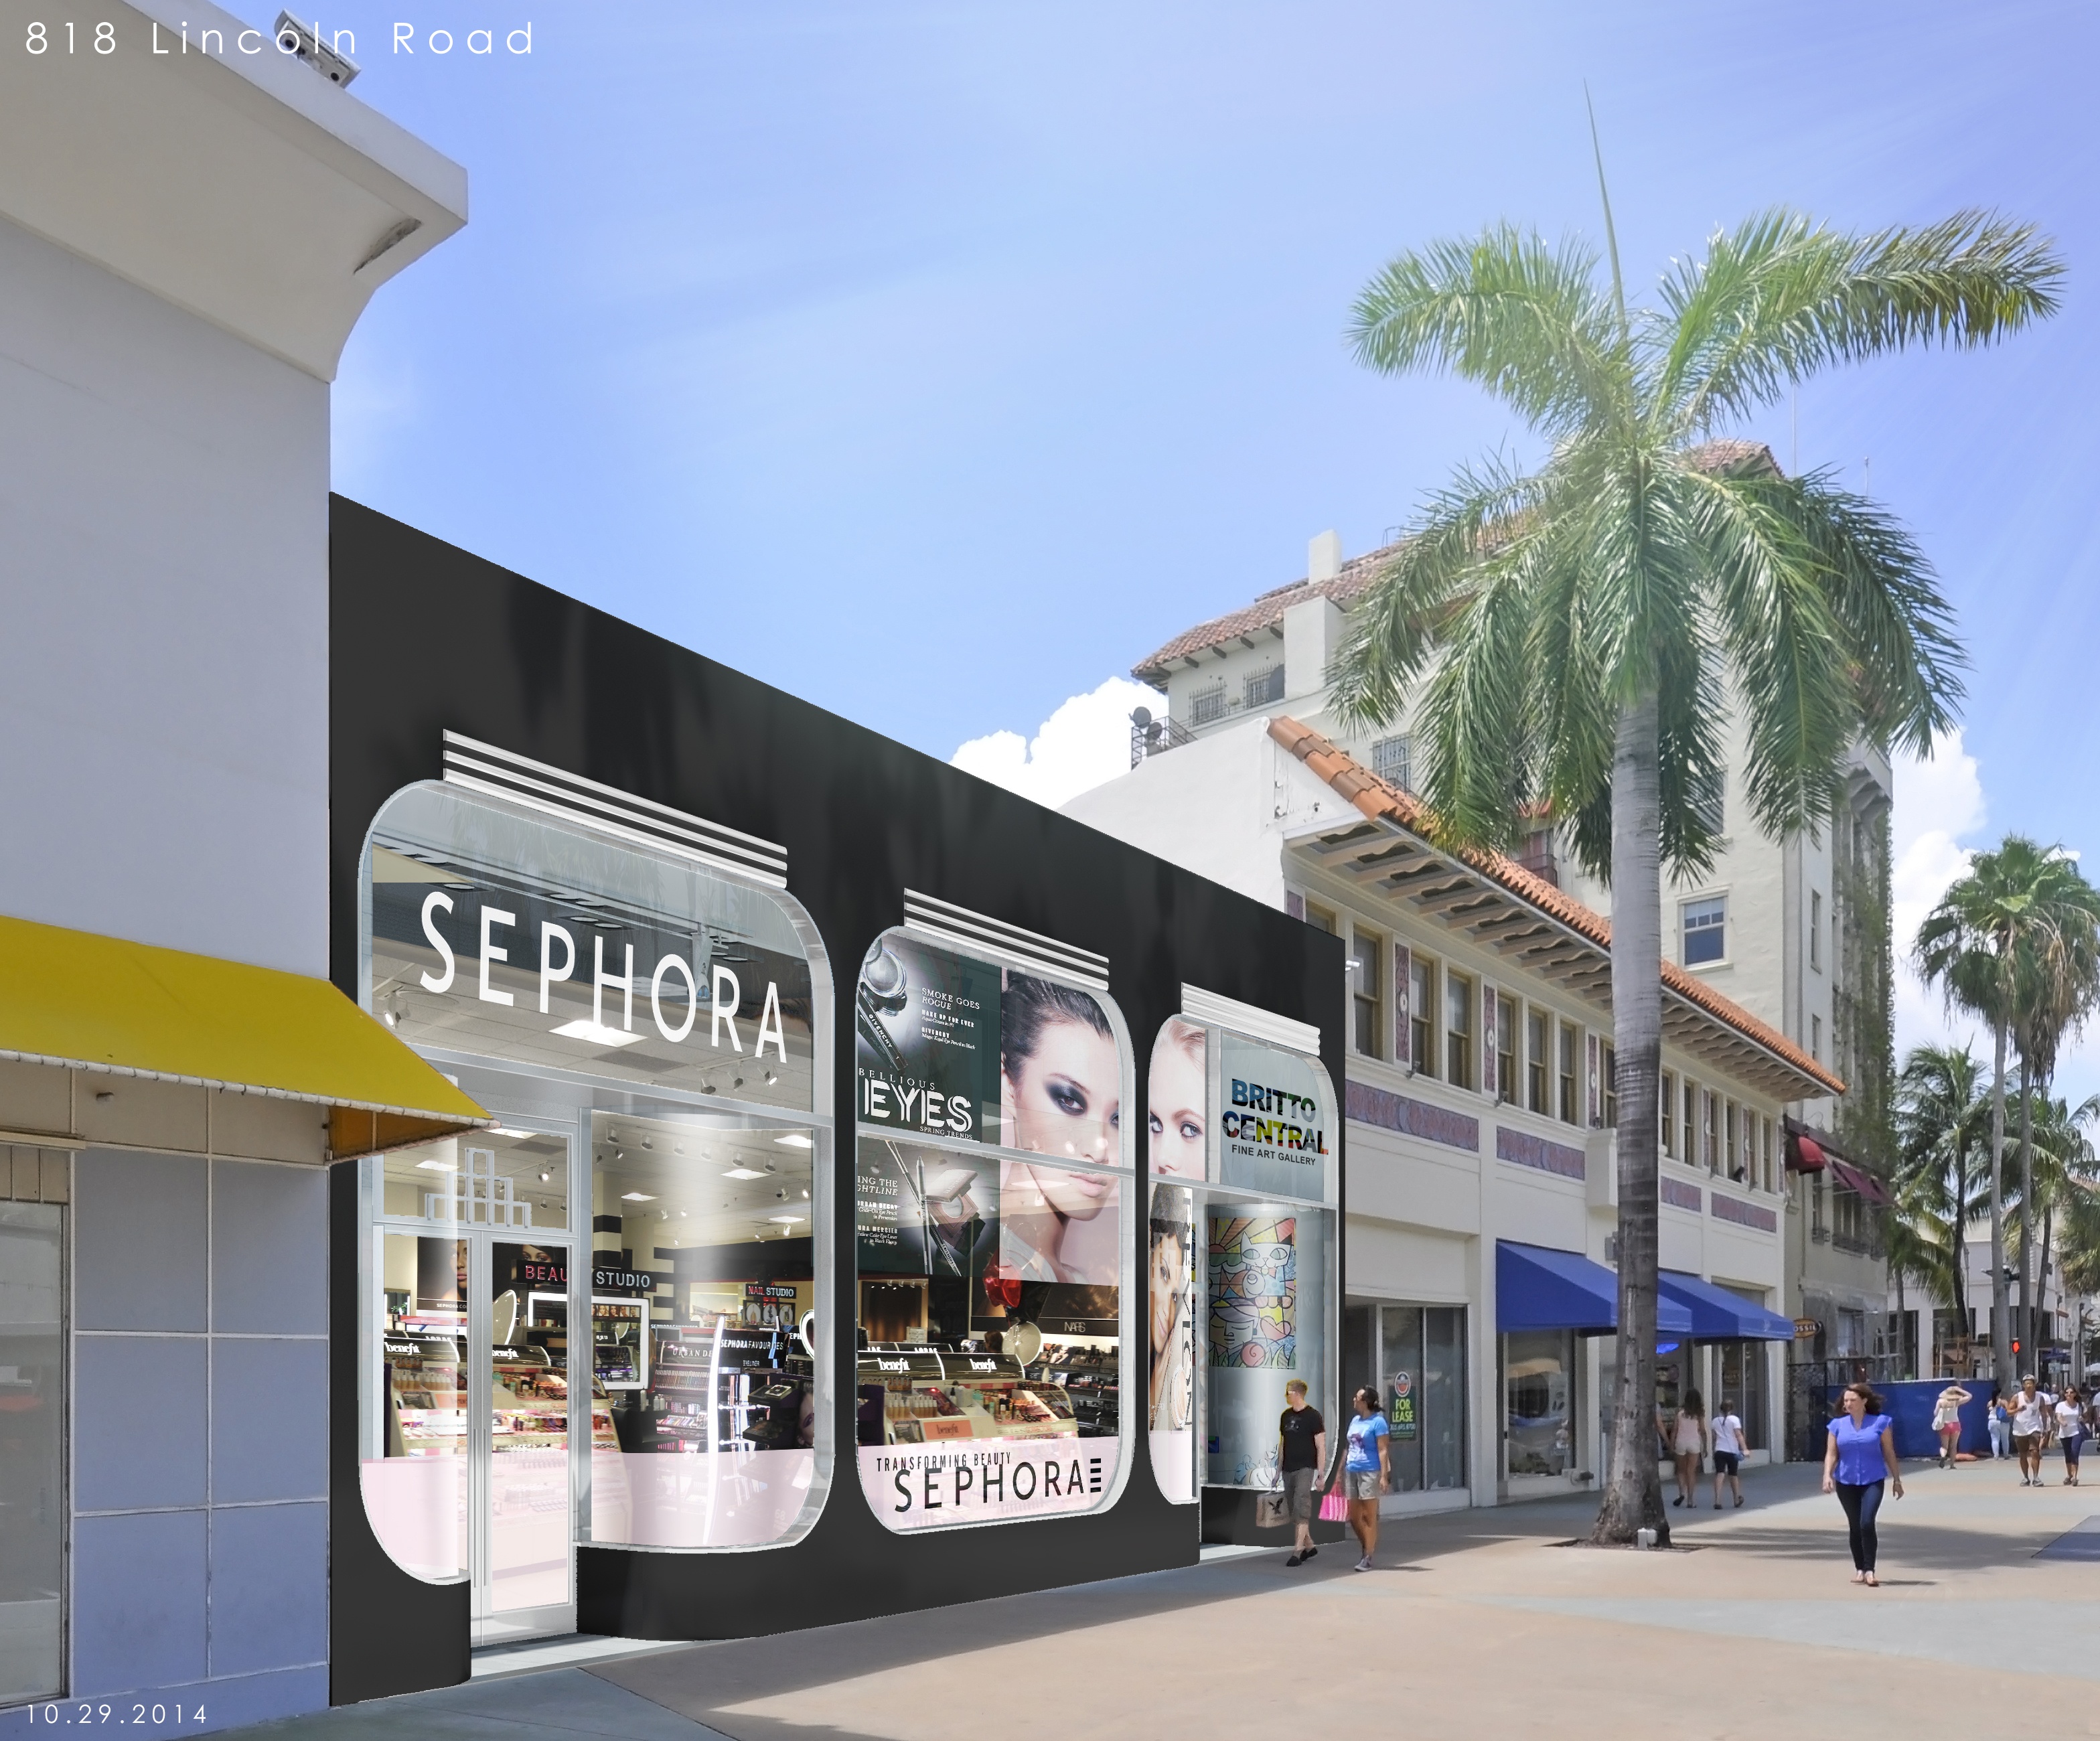 Sephora Signs Lease on Lincoln Road, Will Replace Britto Gallery